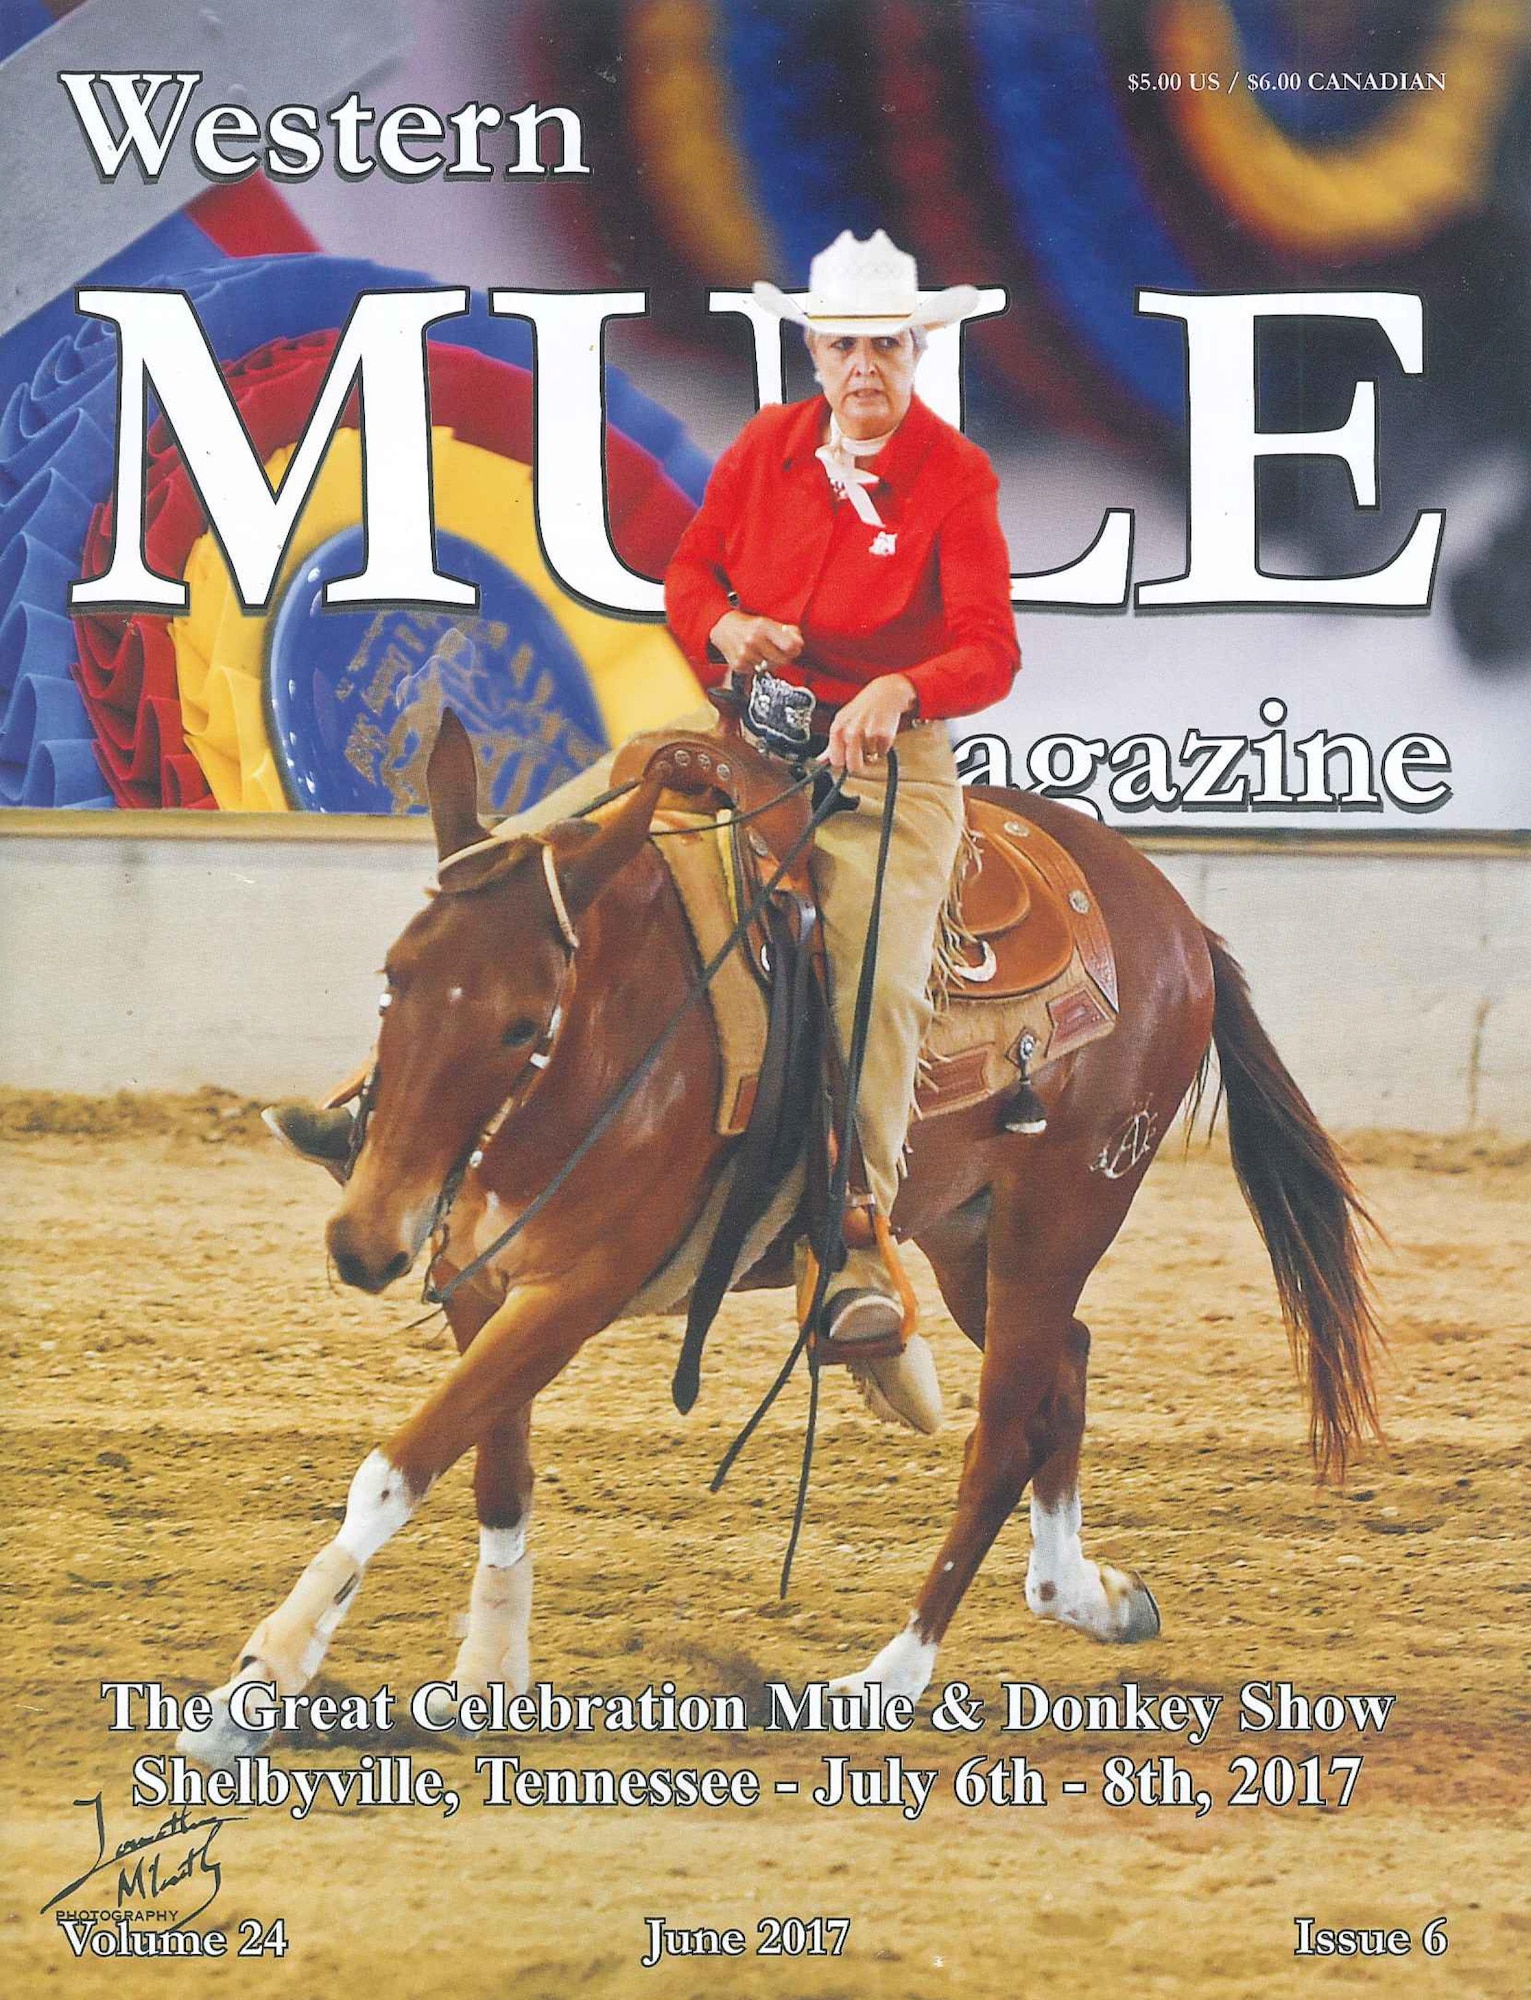 To the surprise of Kim Russell, AEDC property specialist, the June edition of Western Mule Magazine featured herself and her mule Gus at the 2016 Great Celebration Mule & Donkey Show held last summer in Shelbyville, where Gus won the Open Mule Reining Class. (Courtesy photo)